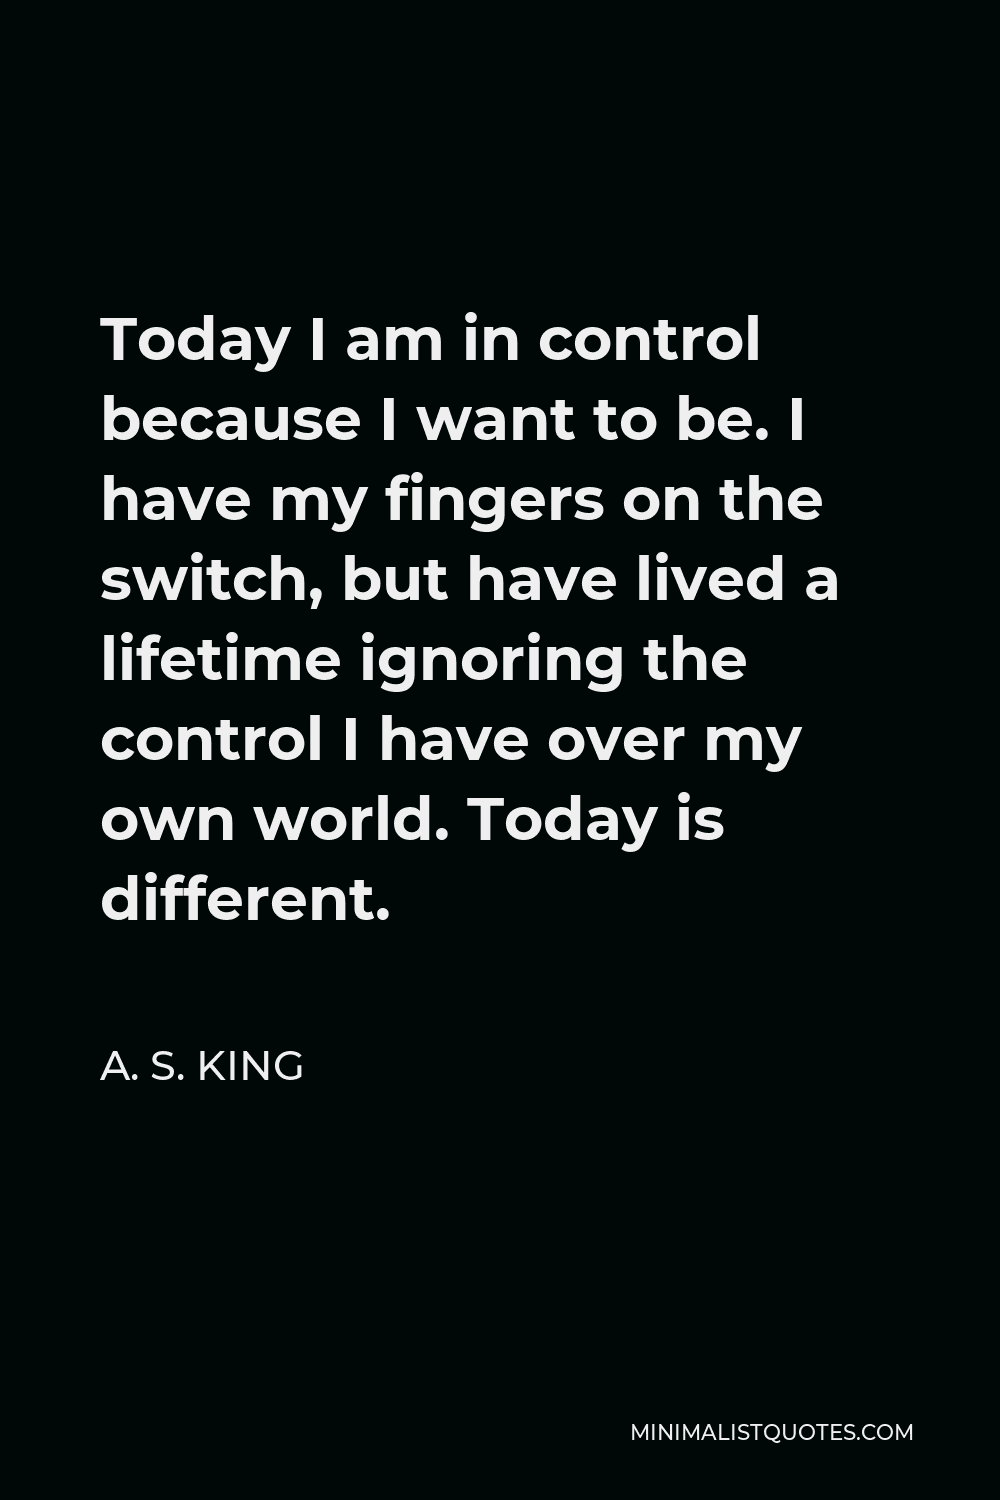 A. S. King Quote - Today I am in control because I want to be. I have my fingers on the switch, but have lived a lifetime ignoring the control I have over my own world. Today is different.